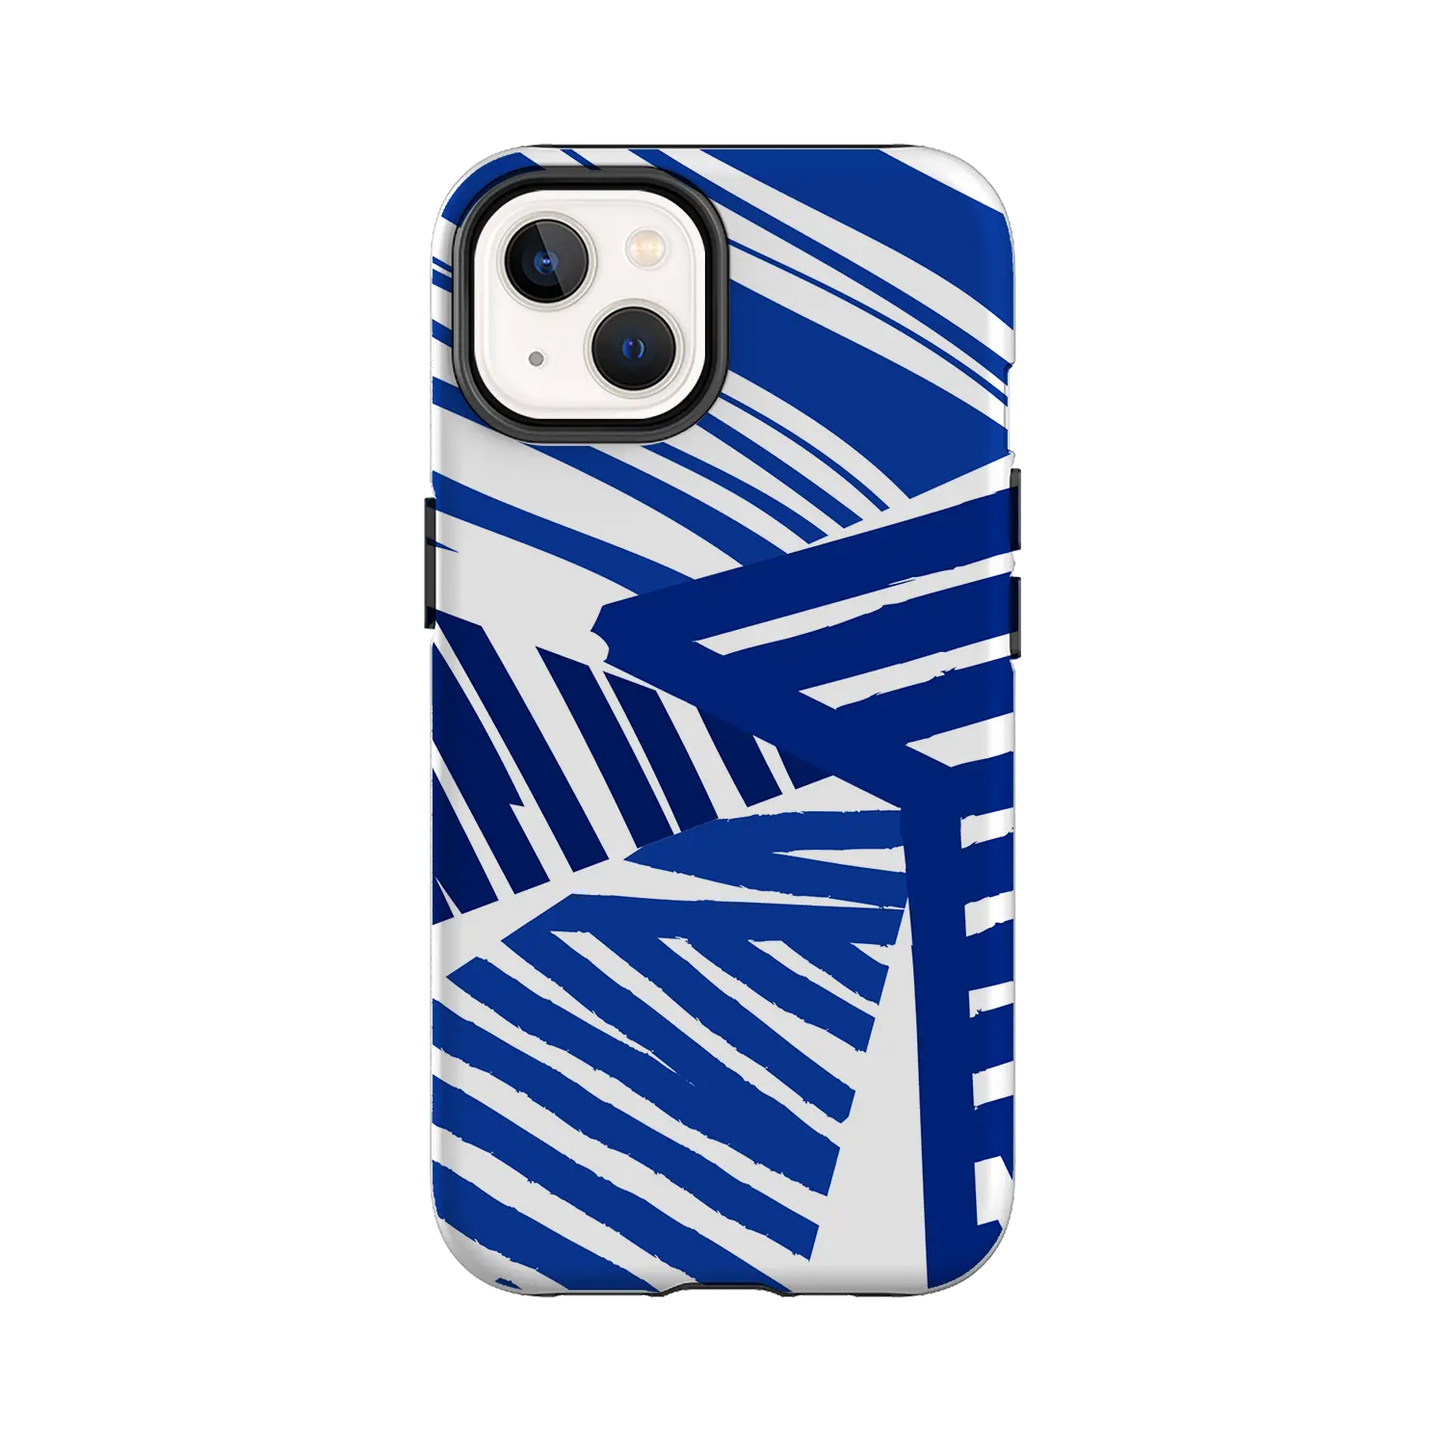 Stripes - Personalised iPhone Case